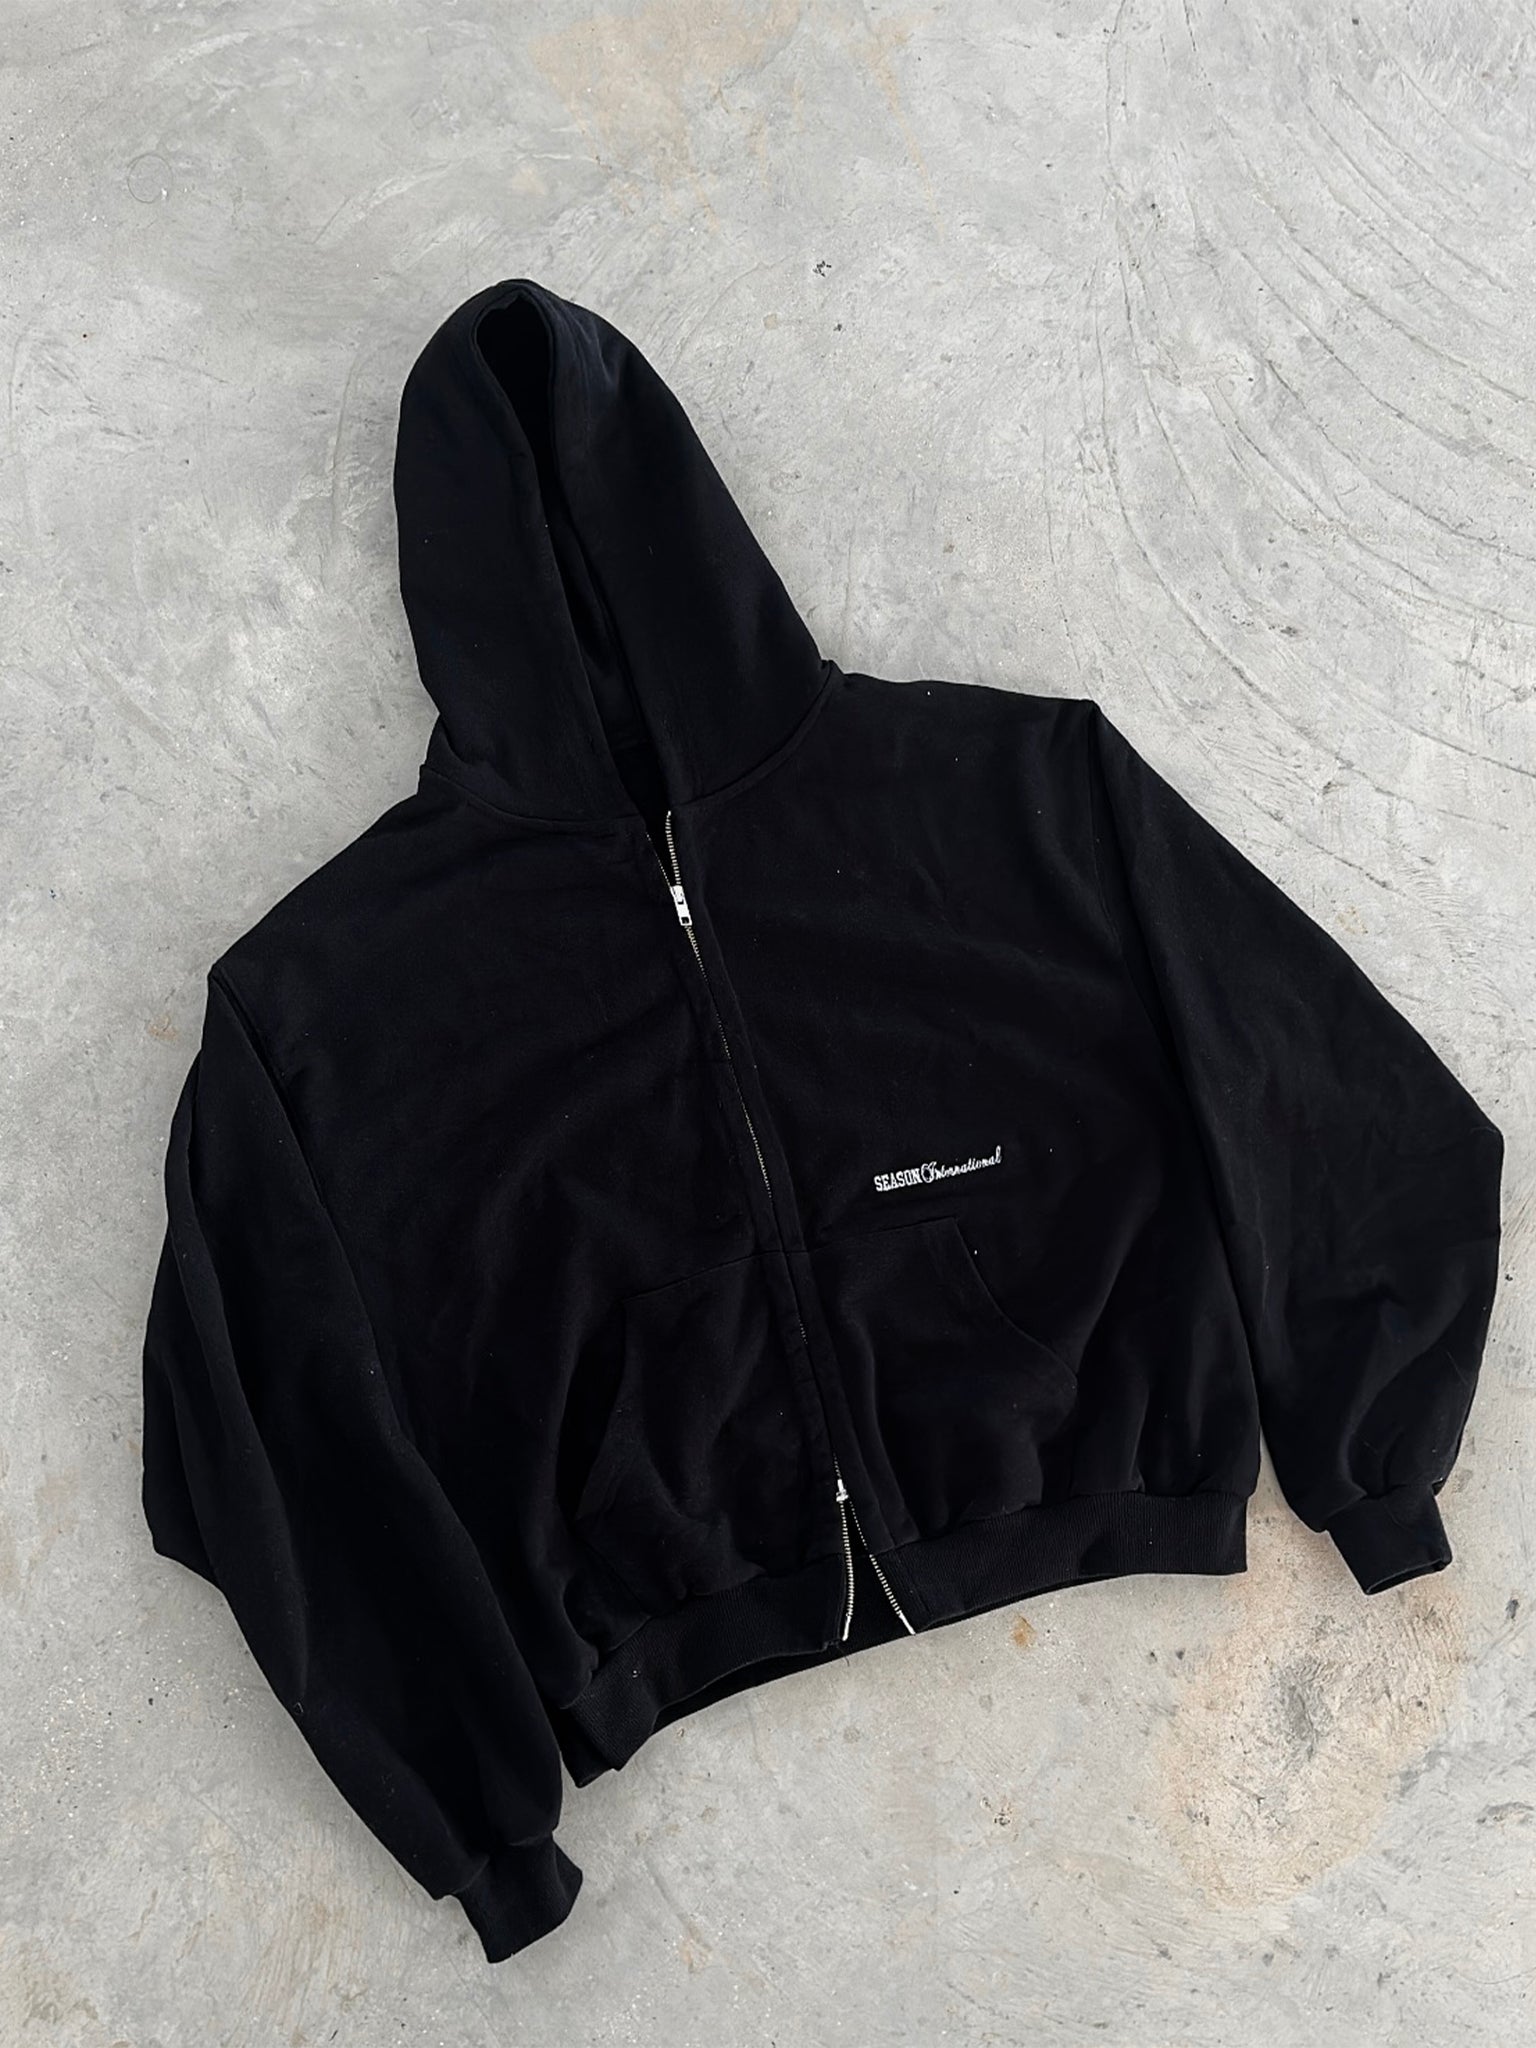 Logo Embroidered Zip-Up Hoodie